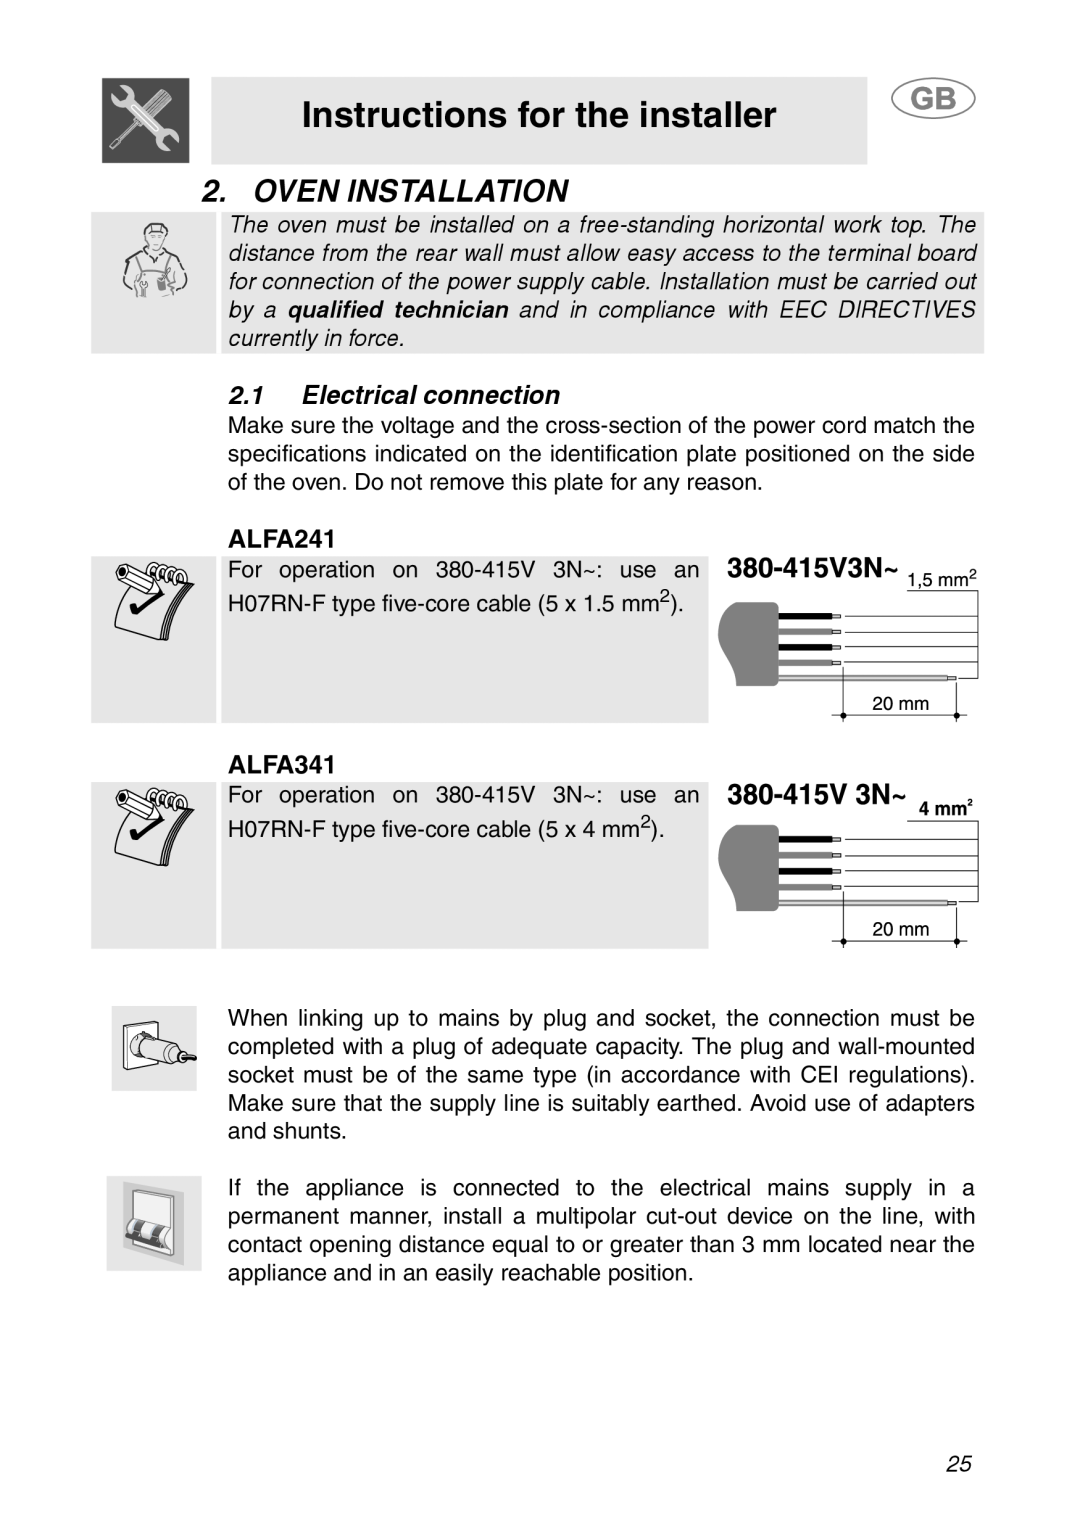 Smeg ALFA341XM manual Instructions for the installer, Oven Installation, Electrical connection, ALFA241 